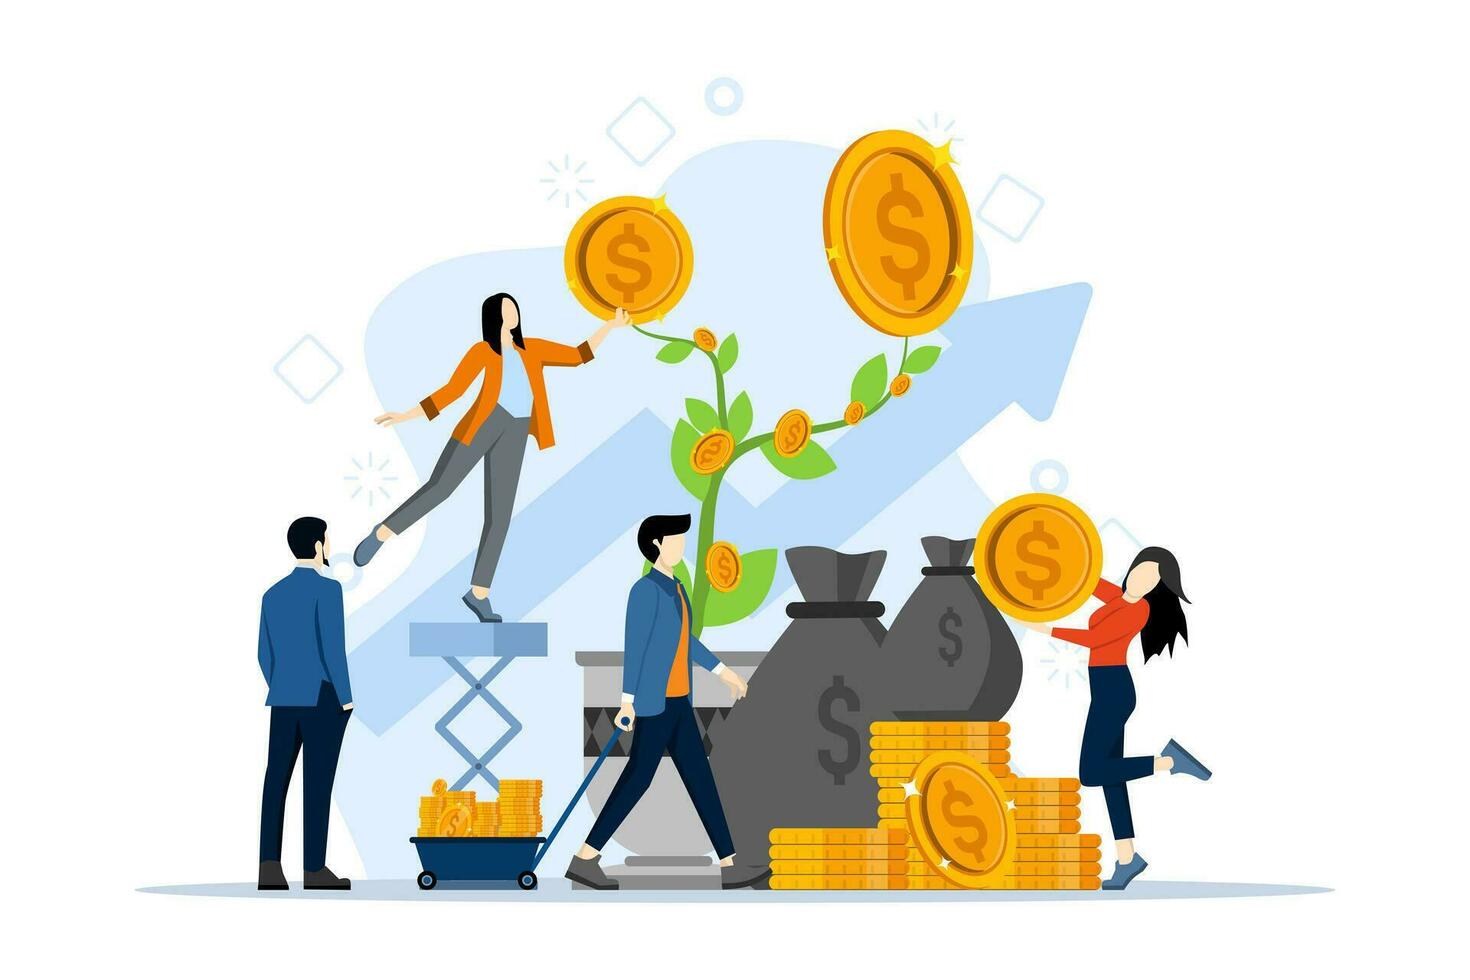 Money tree concept with tiny characters. Businessman working with growing gold coins in a pot flat vector illustration. Bank investment and savings growth, passive income profit metaphor idea.